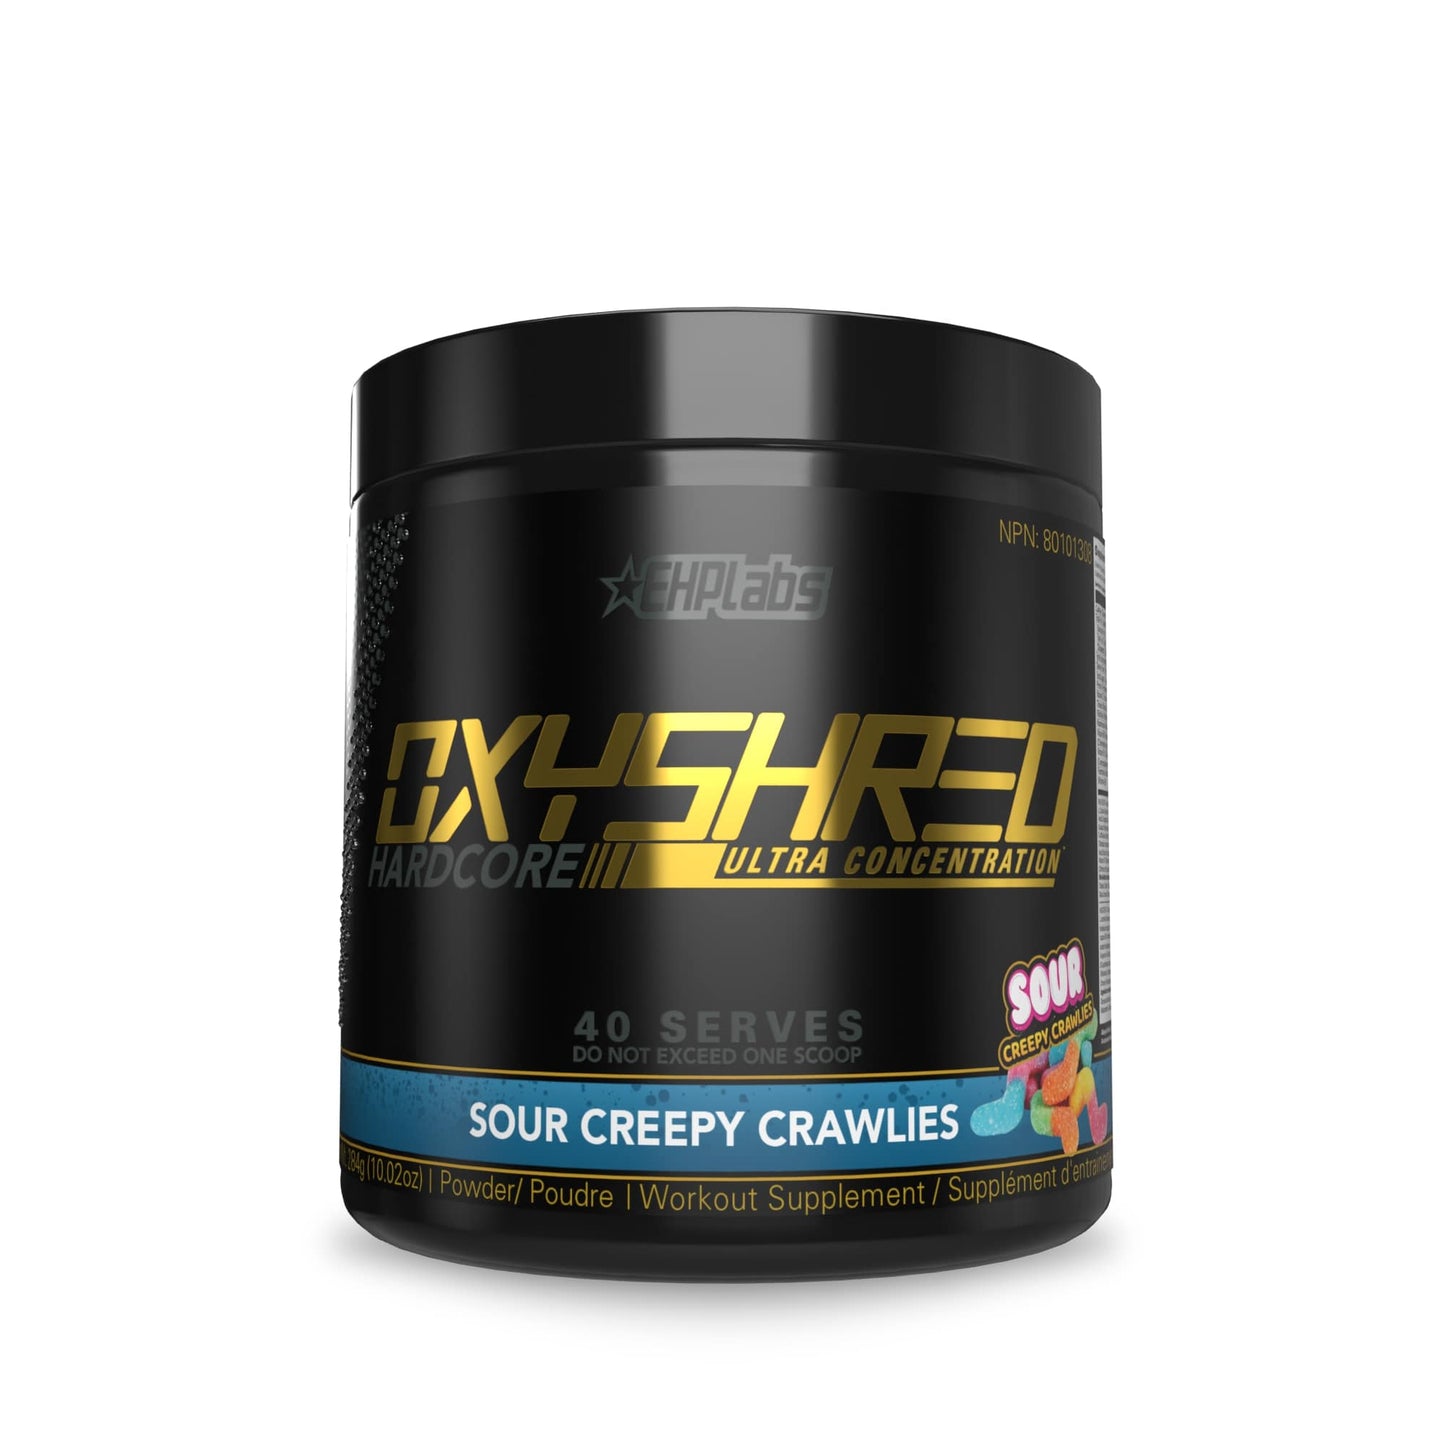 EHP Labs OxyShred Hardcore Ultra Concentration 40 Serves - Supplements - Limited Edition Sour Creepy Crawlies - The Cave Gym